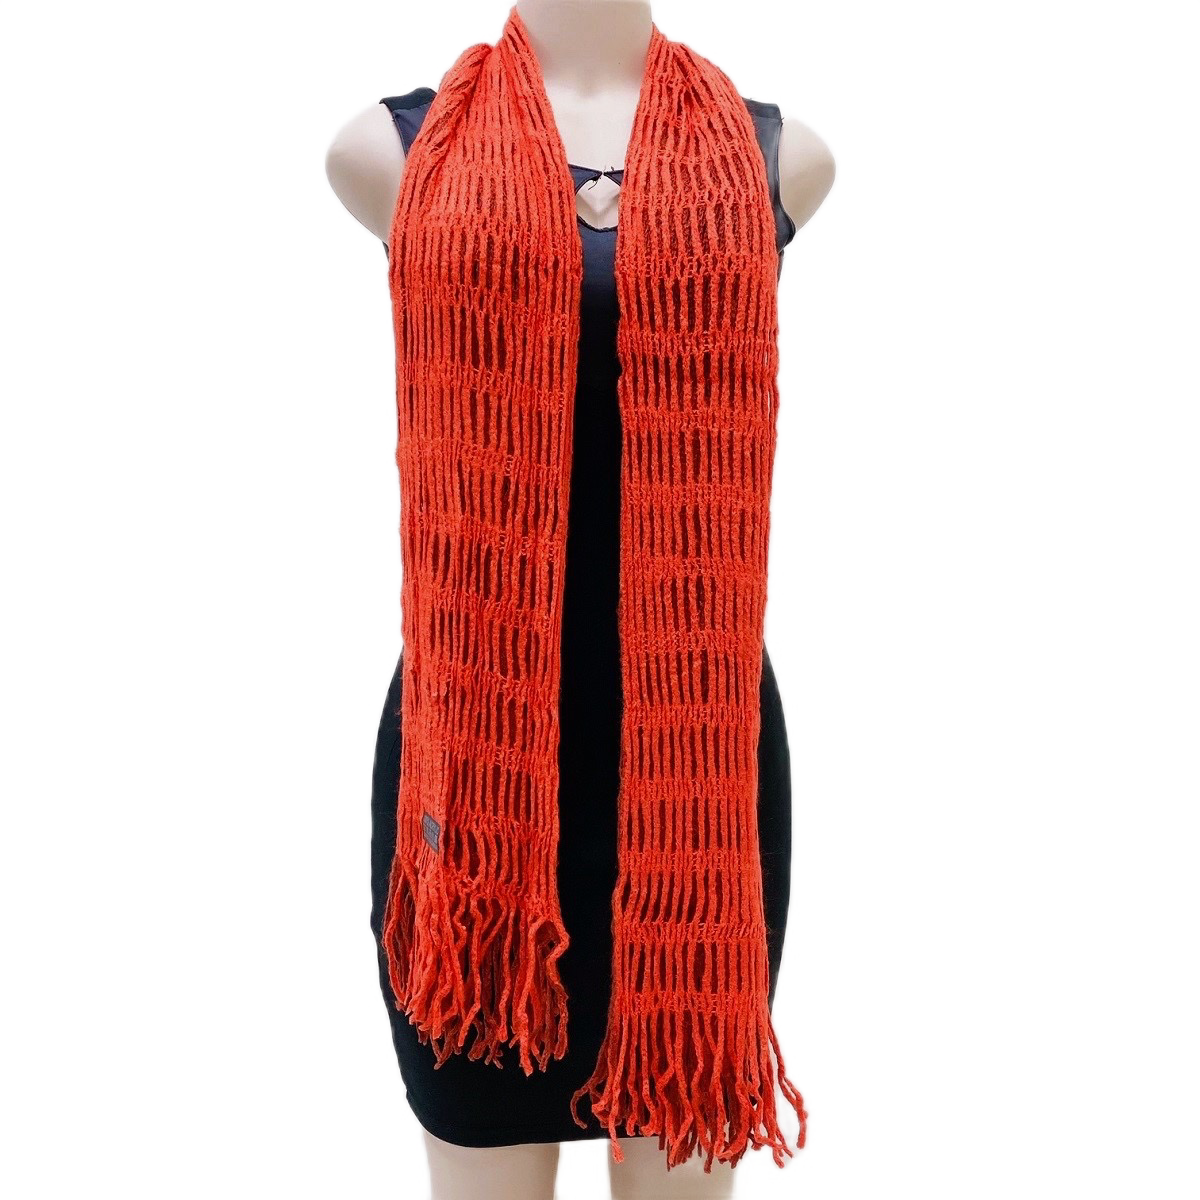 Fishnet Infinity or Tradition Scarf JB256(11Colors, 1Doz)